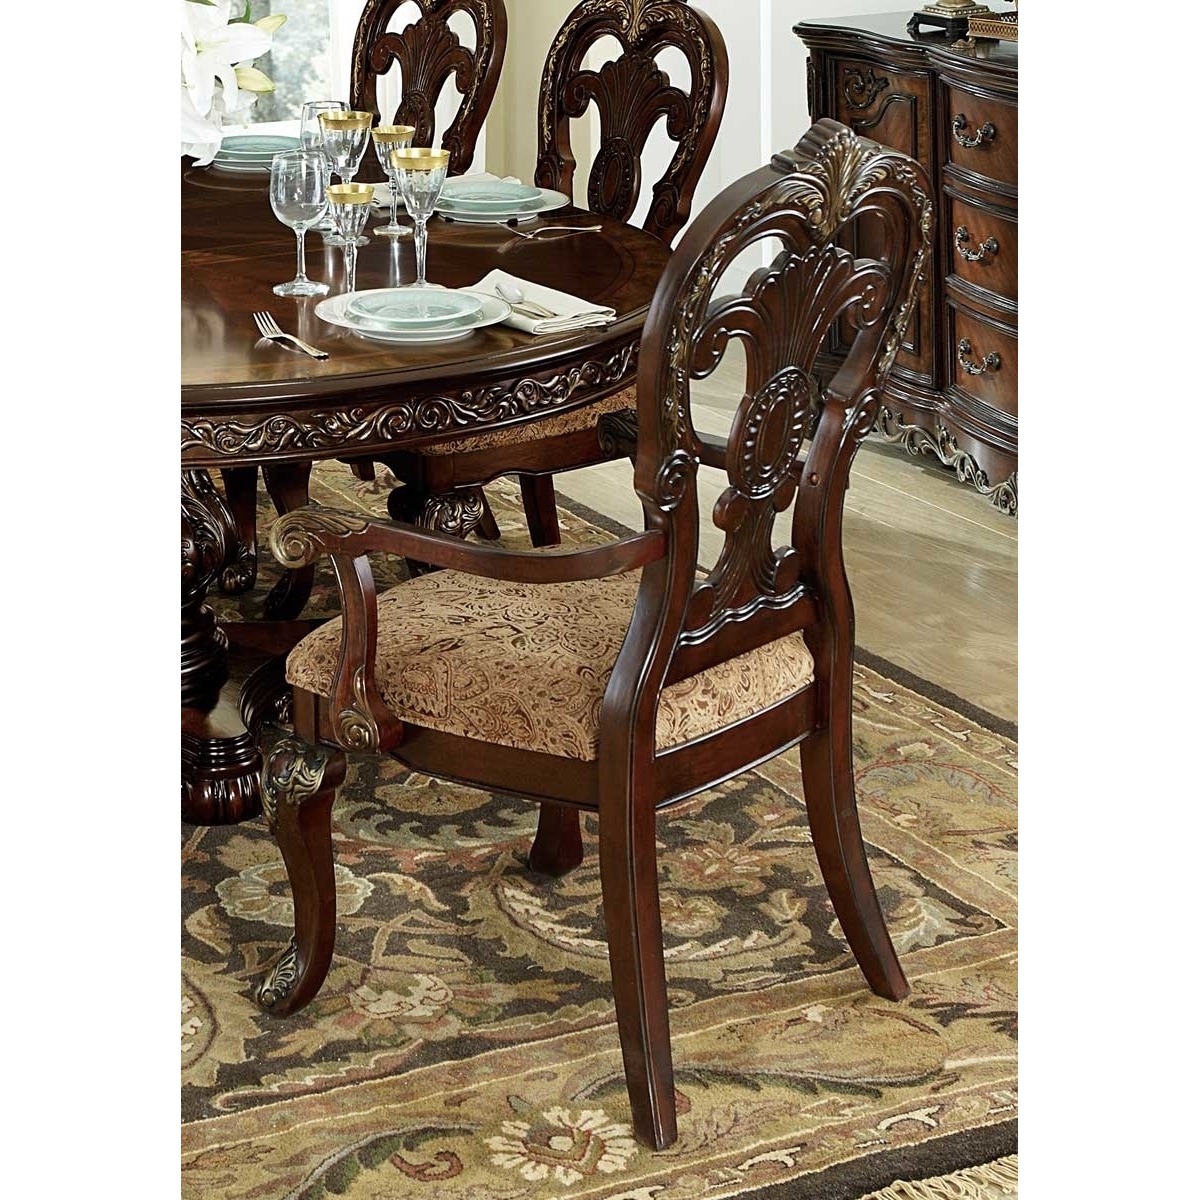 Wood Fabric Arm Chair With Deep Engraved Design, Brown & Beige (Set Of 2)- Saltoro Sherpi